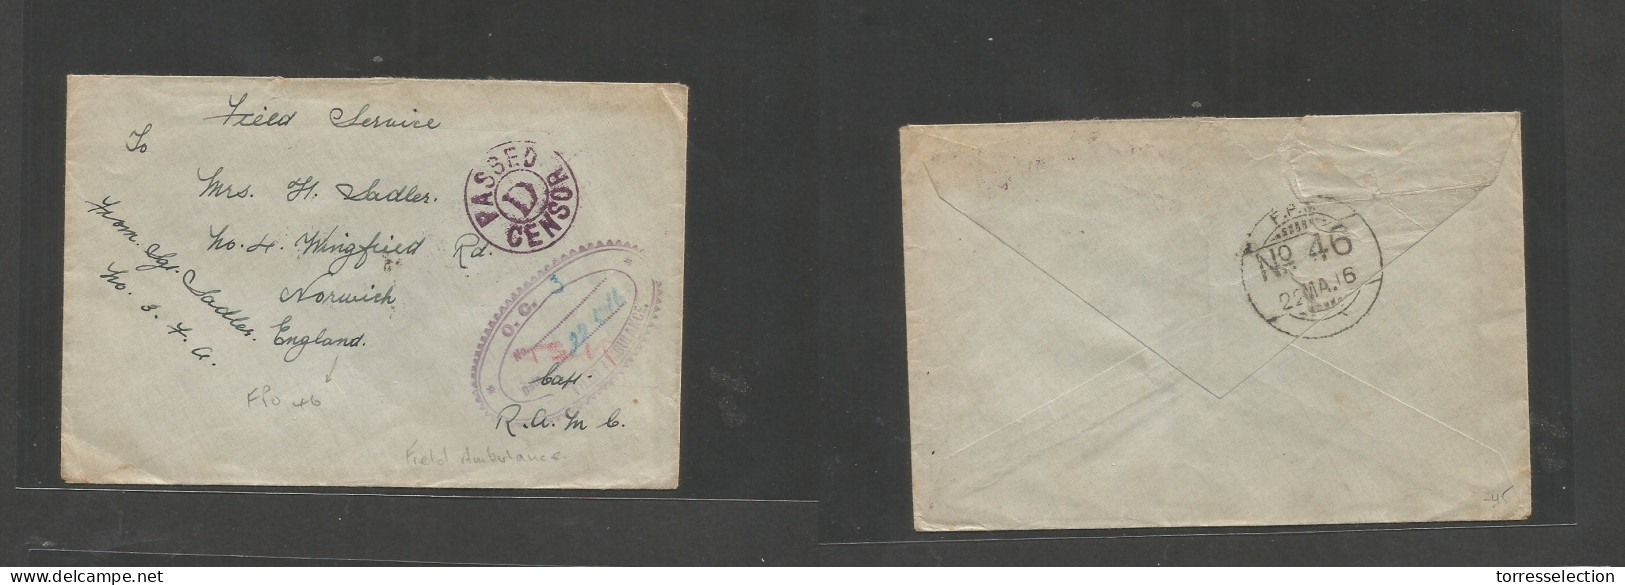 IRAQ. 1916 (22 May) WWI. FPO Nº 46. Field Service Envelope Ciruclated To Norwich, England. Censor Cachet + Oval "Field A - Irak